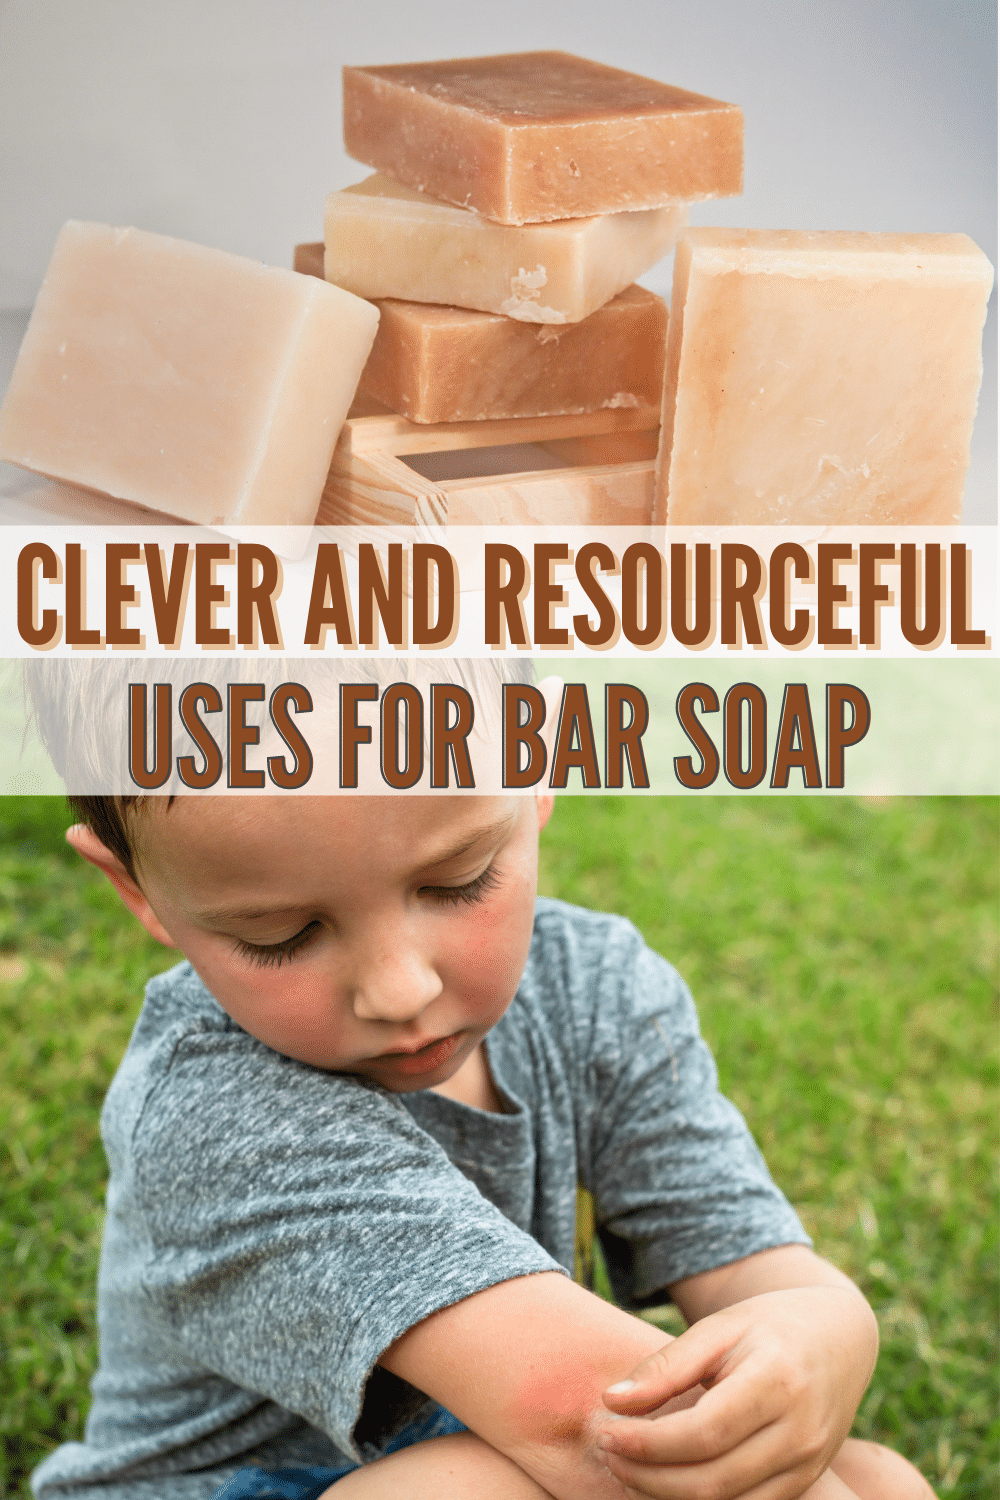 Did you know that bar soap is good for a lot more than cleaning? Check out all of these clever uses for bar soap. #lifehacks #barsoap via @wondermomwannab